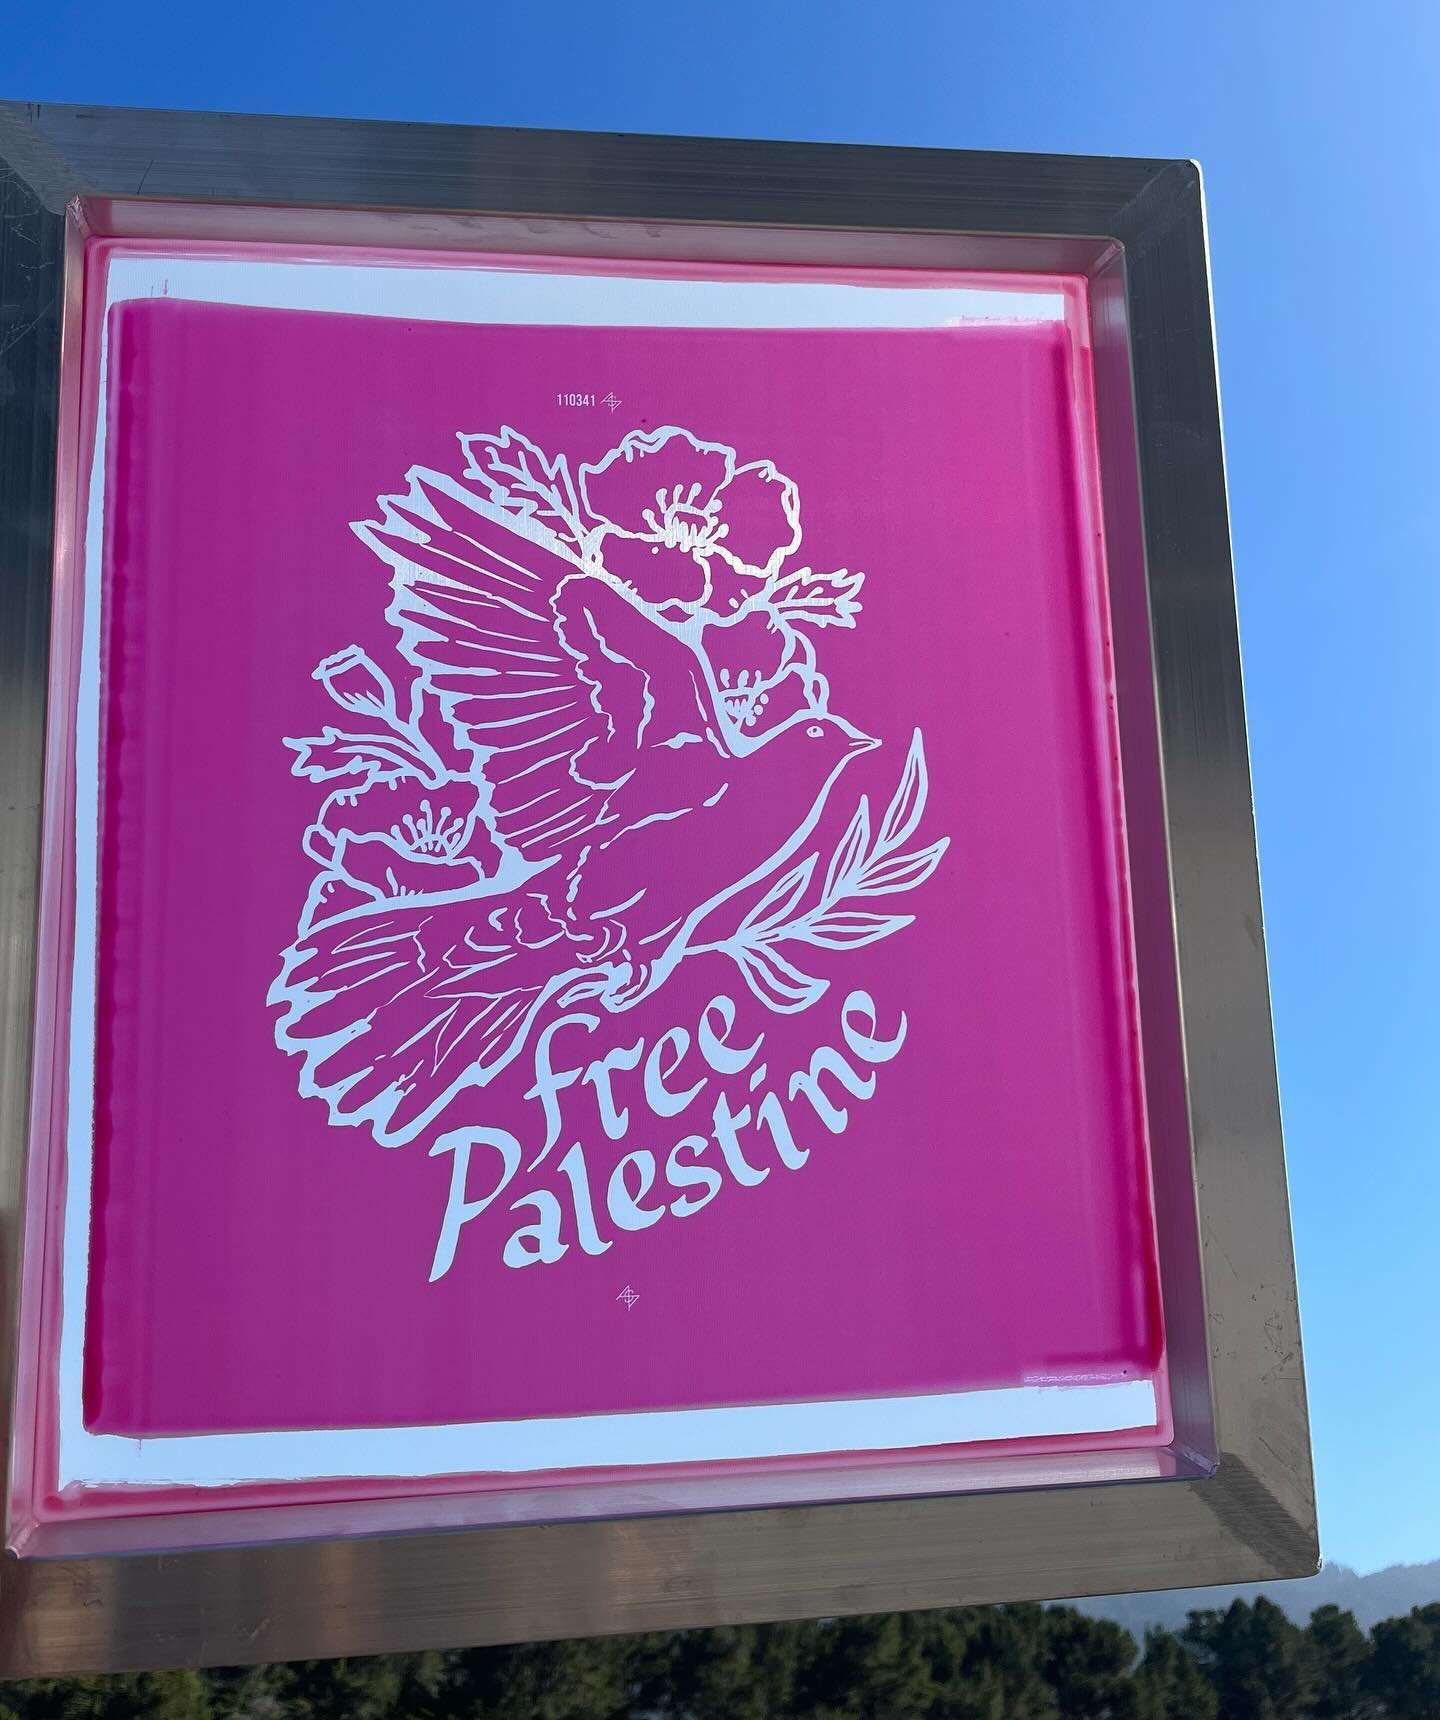 ~*~*~*Free Palestine, End Imperialism🕊️🌹I will be at @gospelflatshowspace this Friday screenprinting with @larry_chakra, all proceeds going to aid efforts in Gaza. We will have shirts and totes and bring anything you want printed on! ~*~*~*~*~
Part